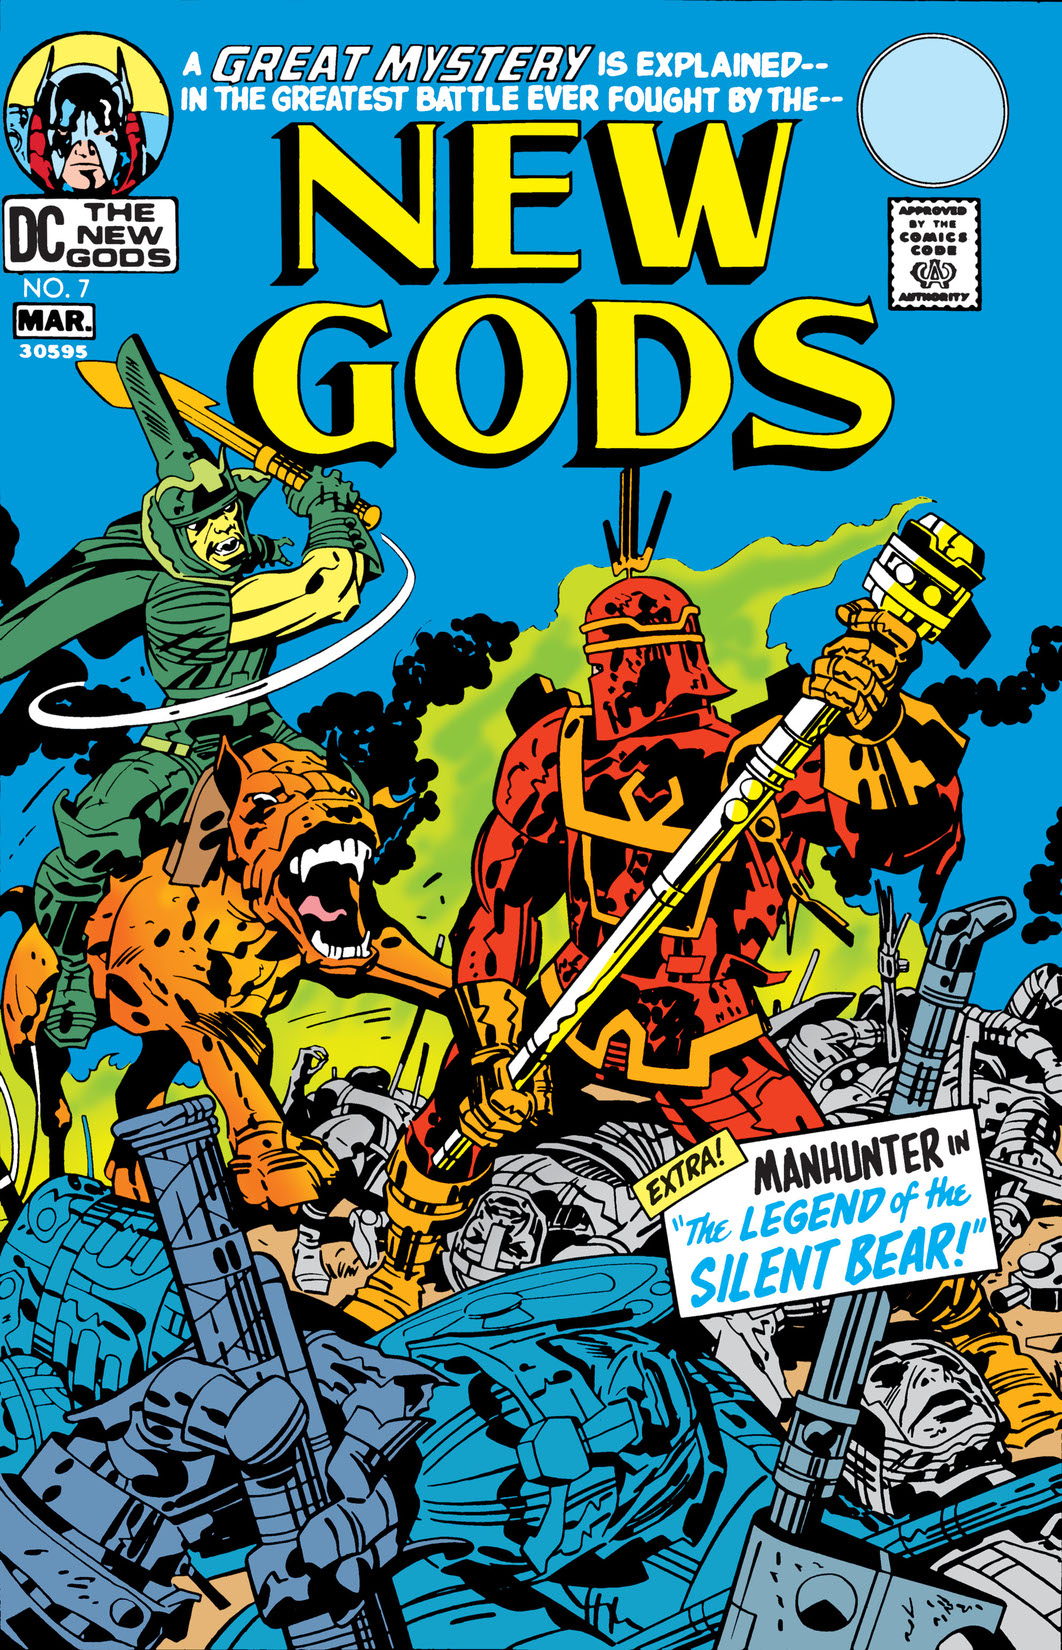 The New Gods #7 preview images